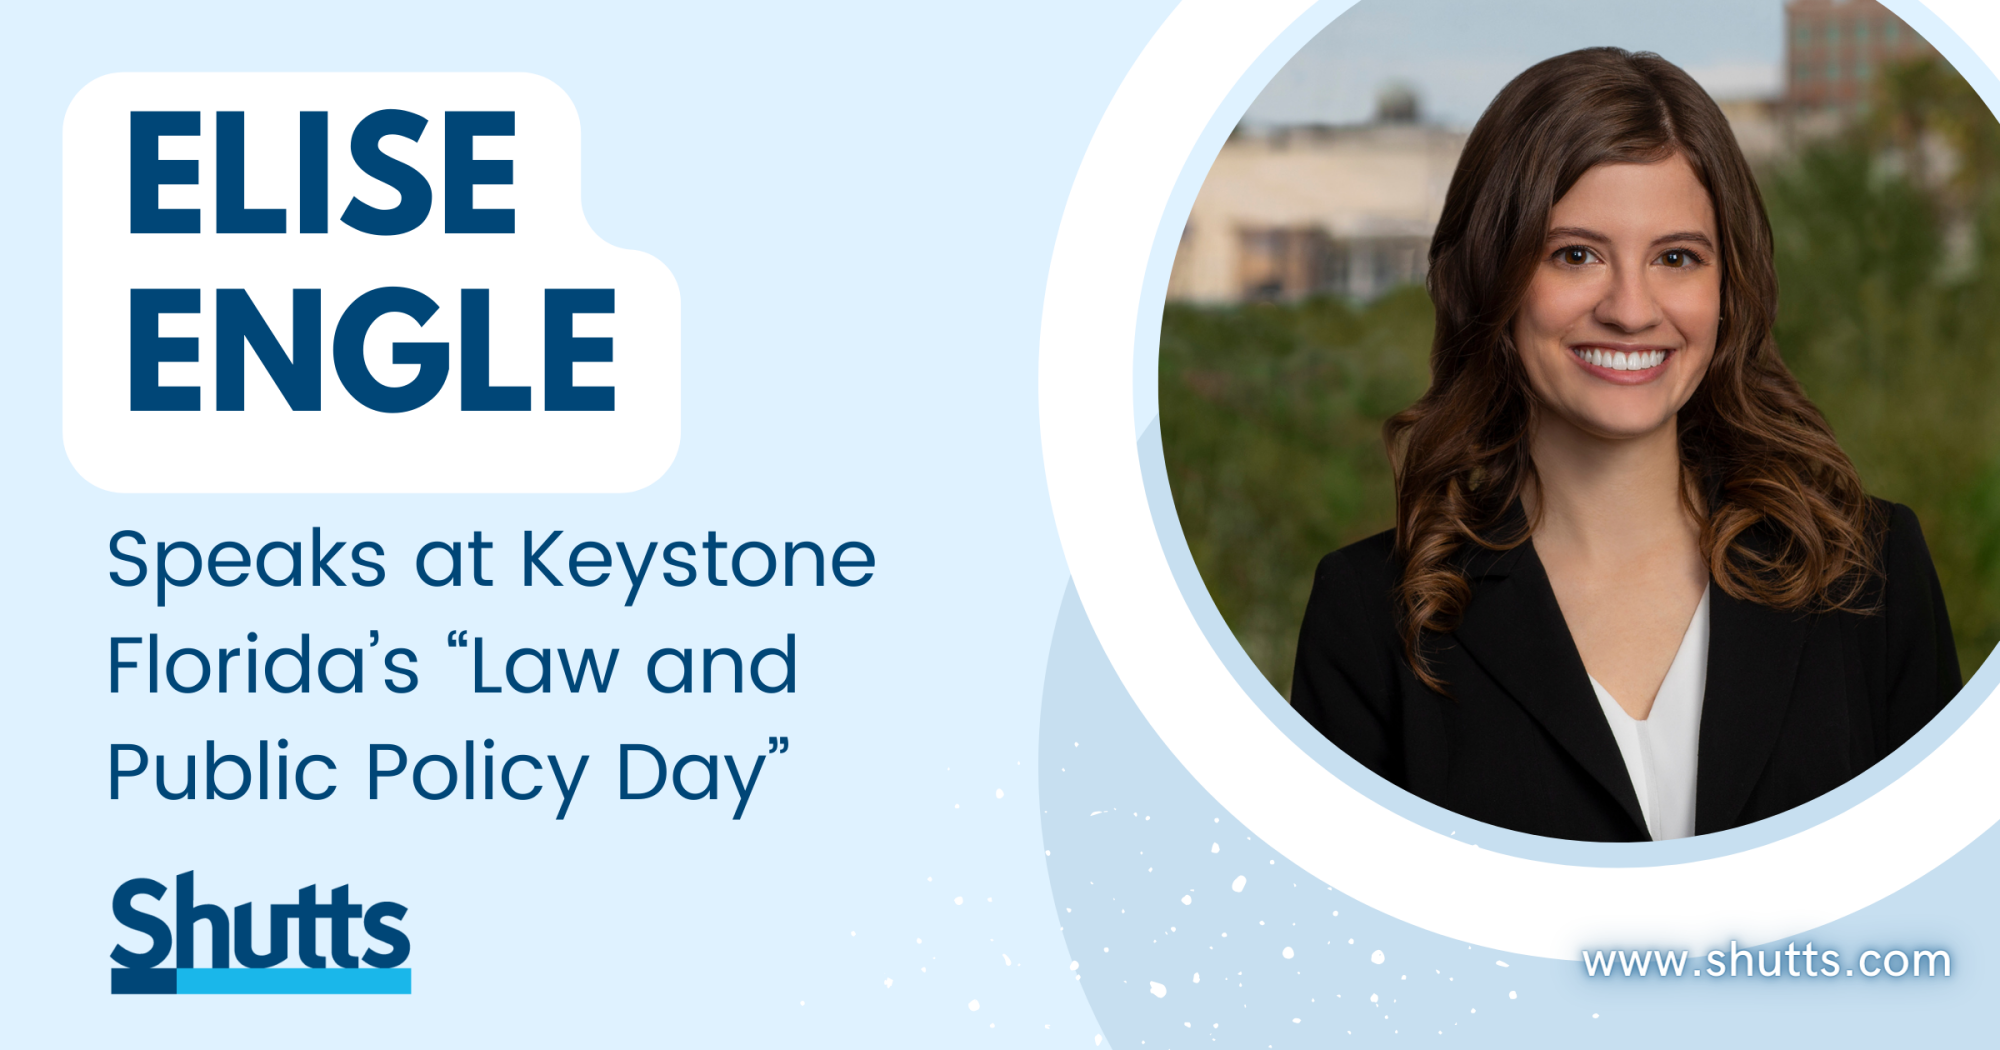 Elise Engle Speaks at Keystone Florida’s “Law and Public Policy Day”